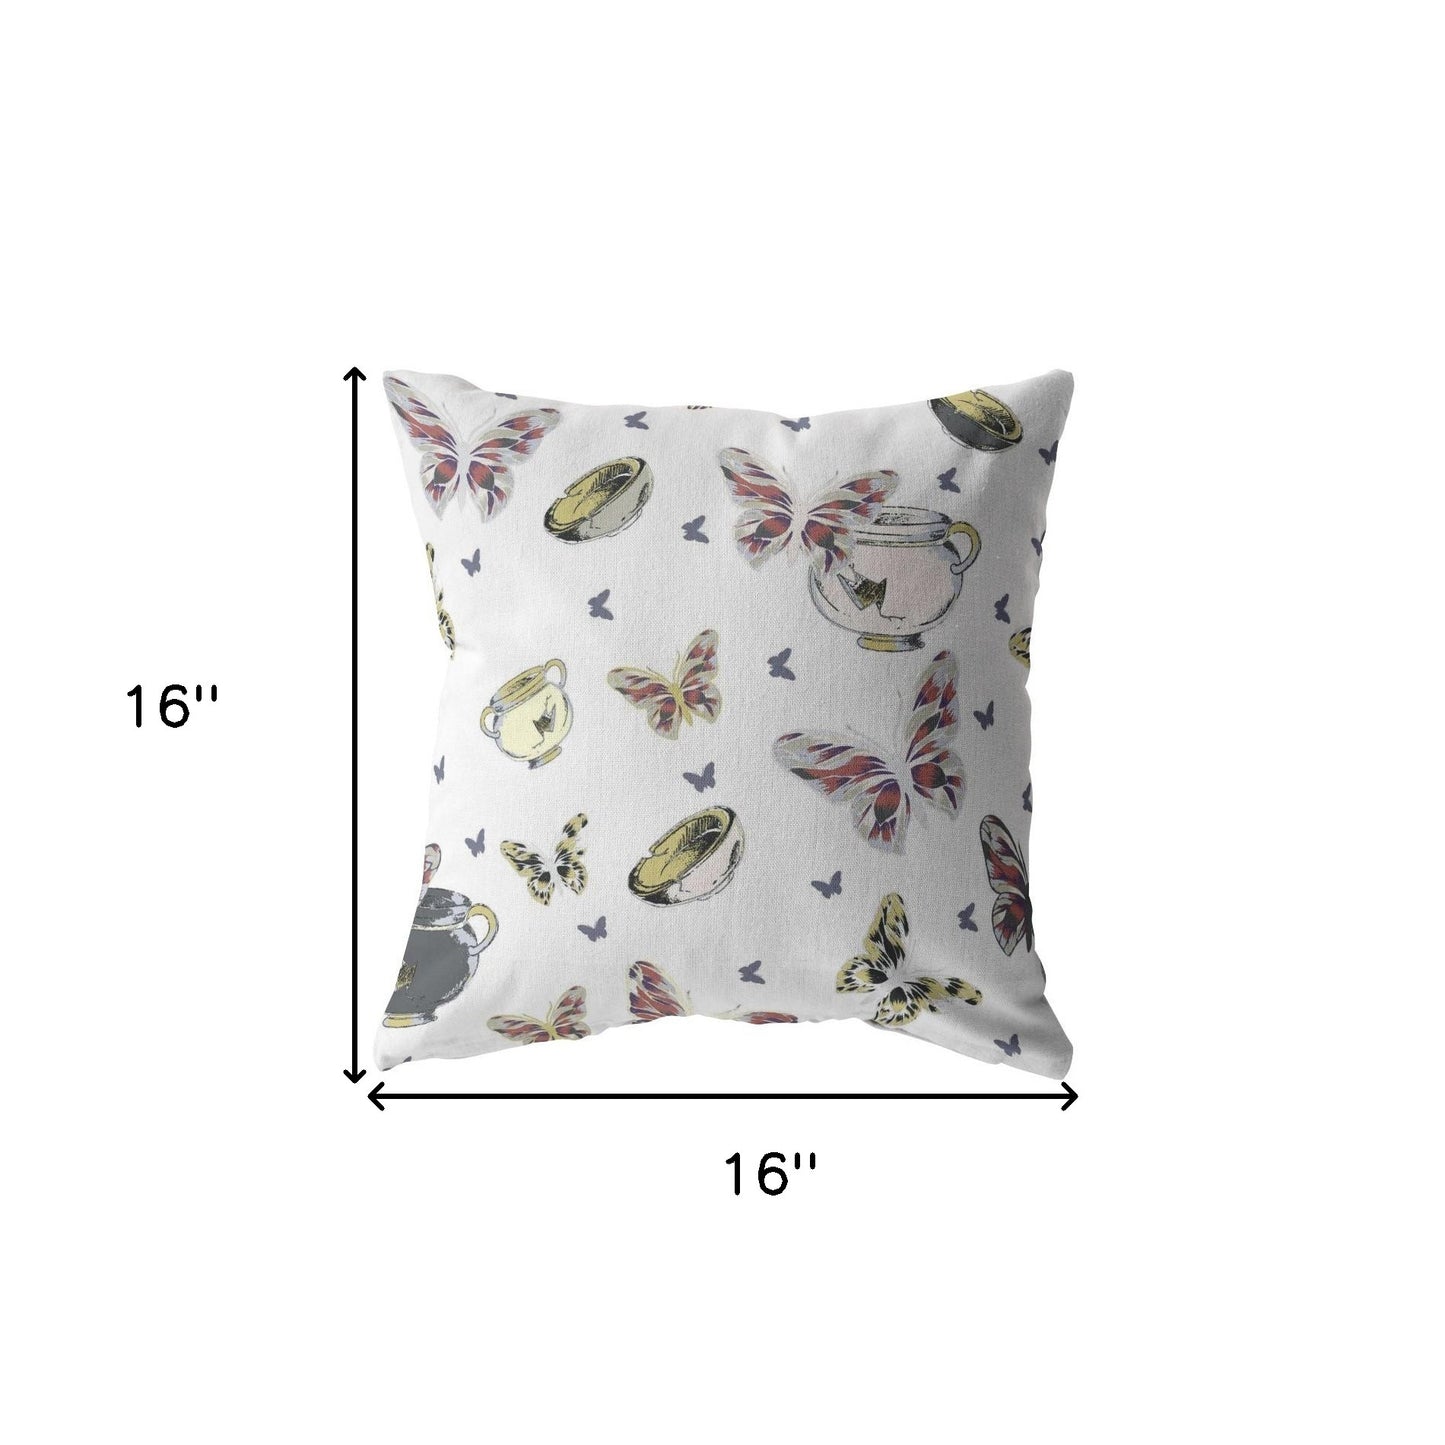 16" White Butterflies Decorative Suede Throw Pillow